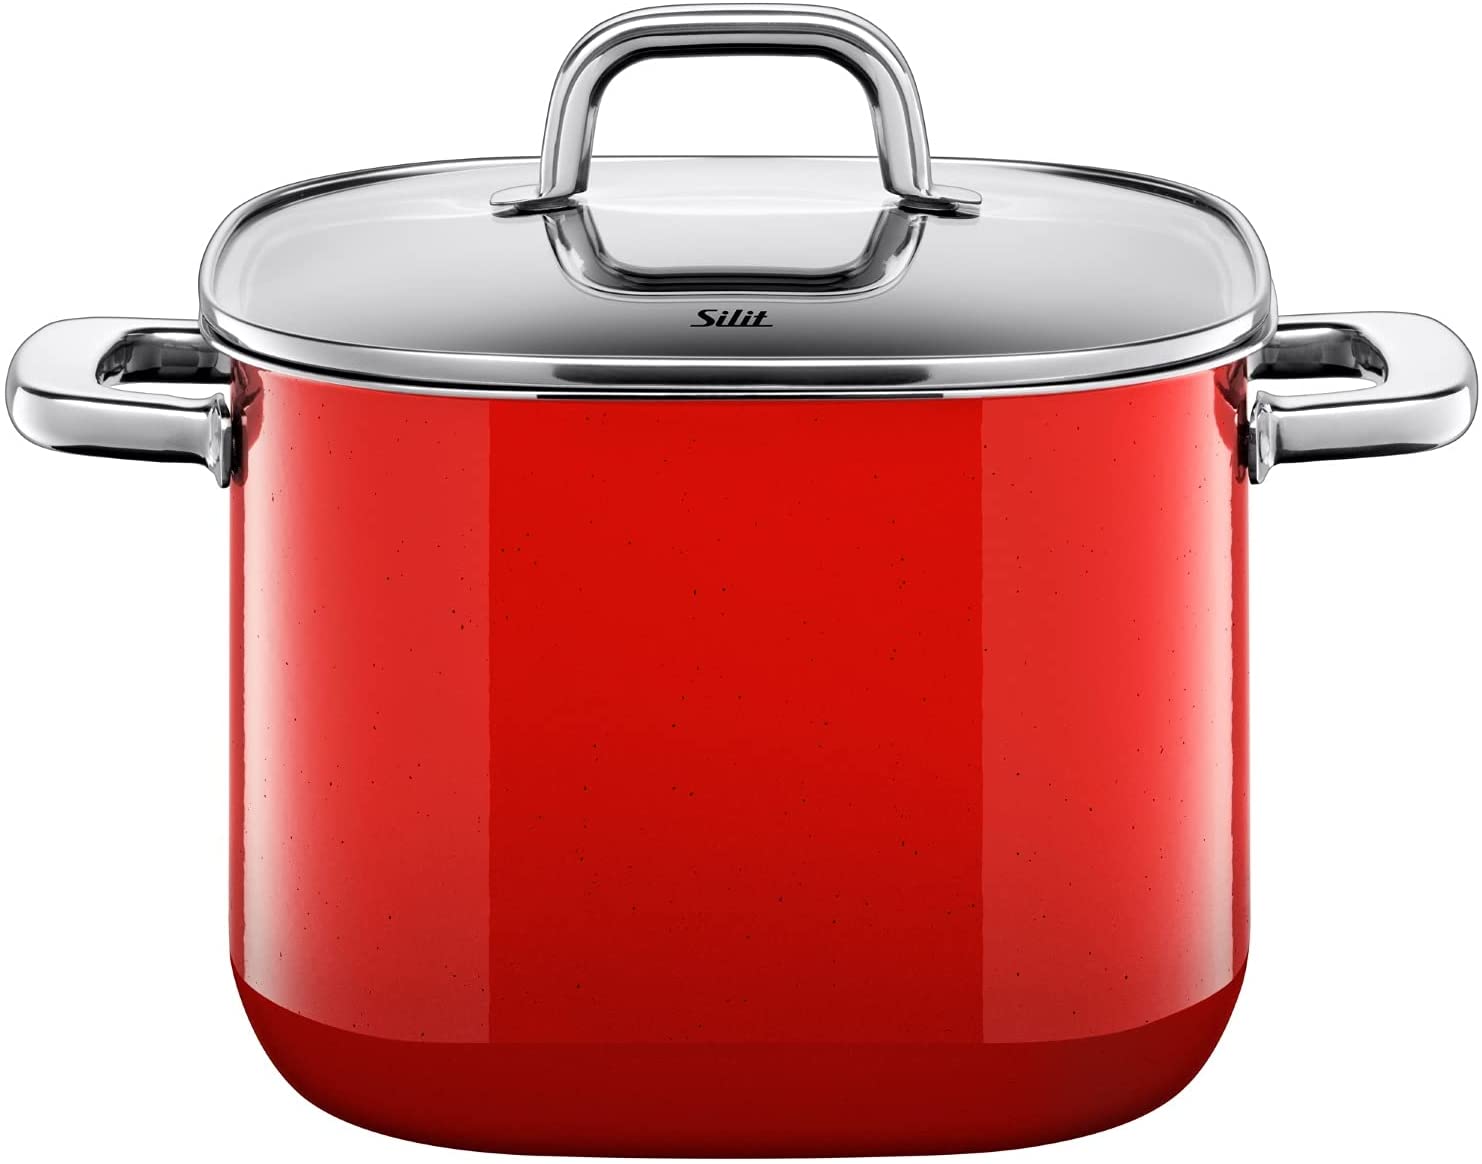 Silit Quadro 2102299561 Tall Cooking Pot Diameter 22 cm approx. 6.8 litre Square Pot Enamel Stackable Glass Silargan Function Lid Ceramic Suitable for Induction Cookers Dishwasher Safe, 25 cm, Red